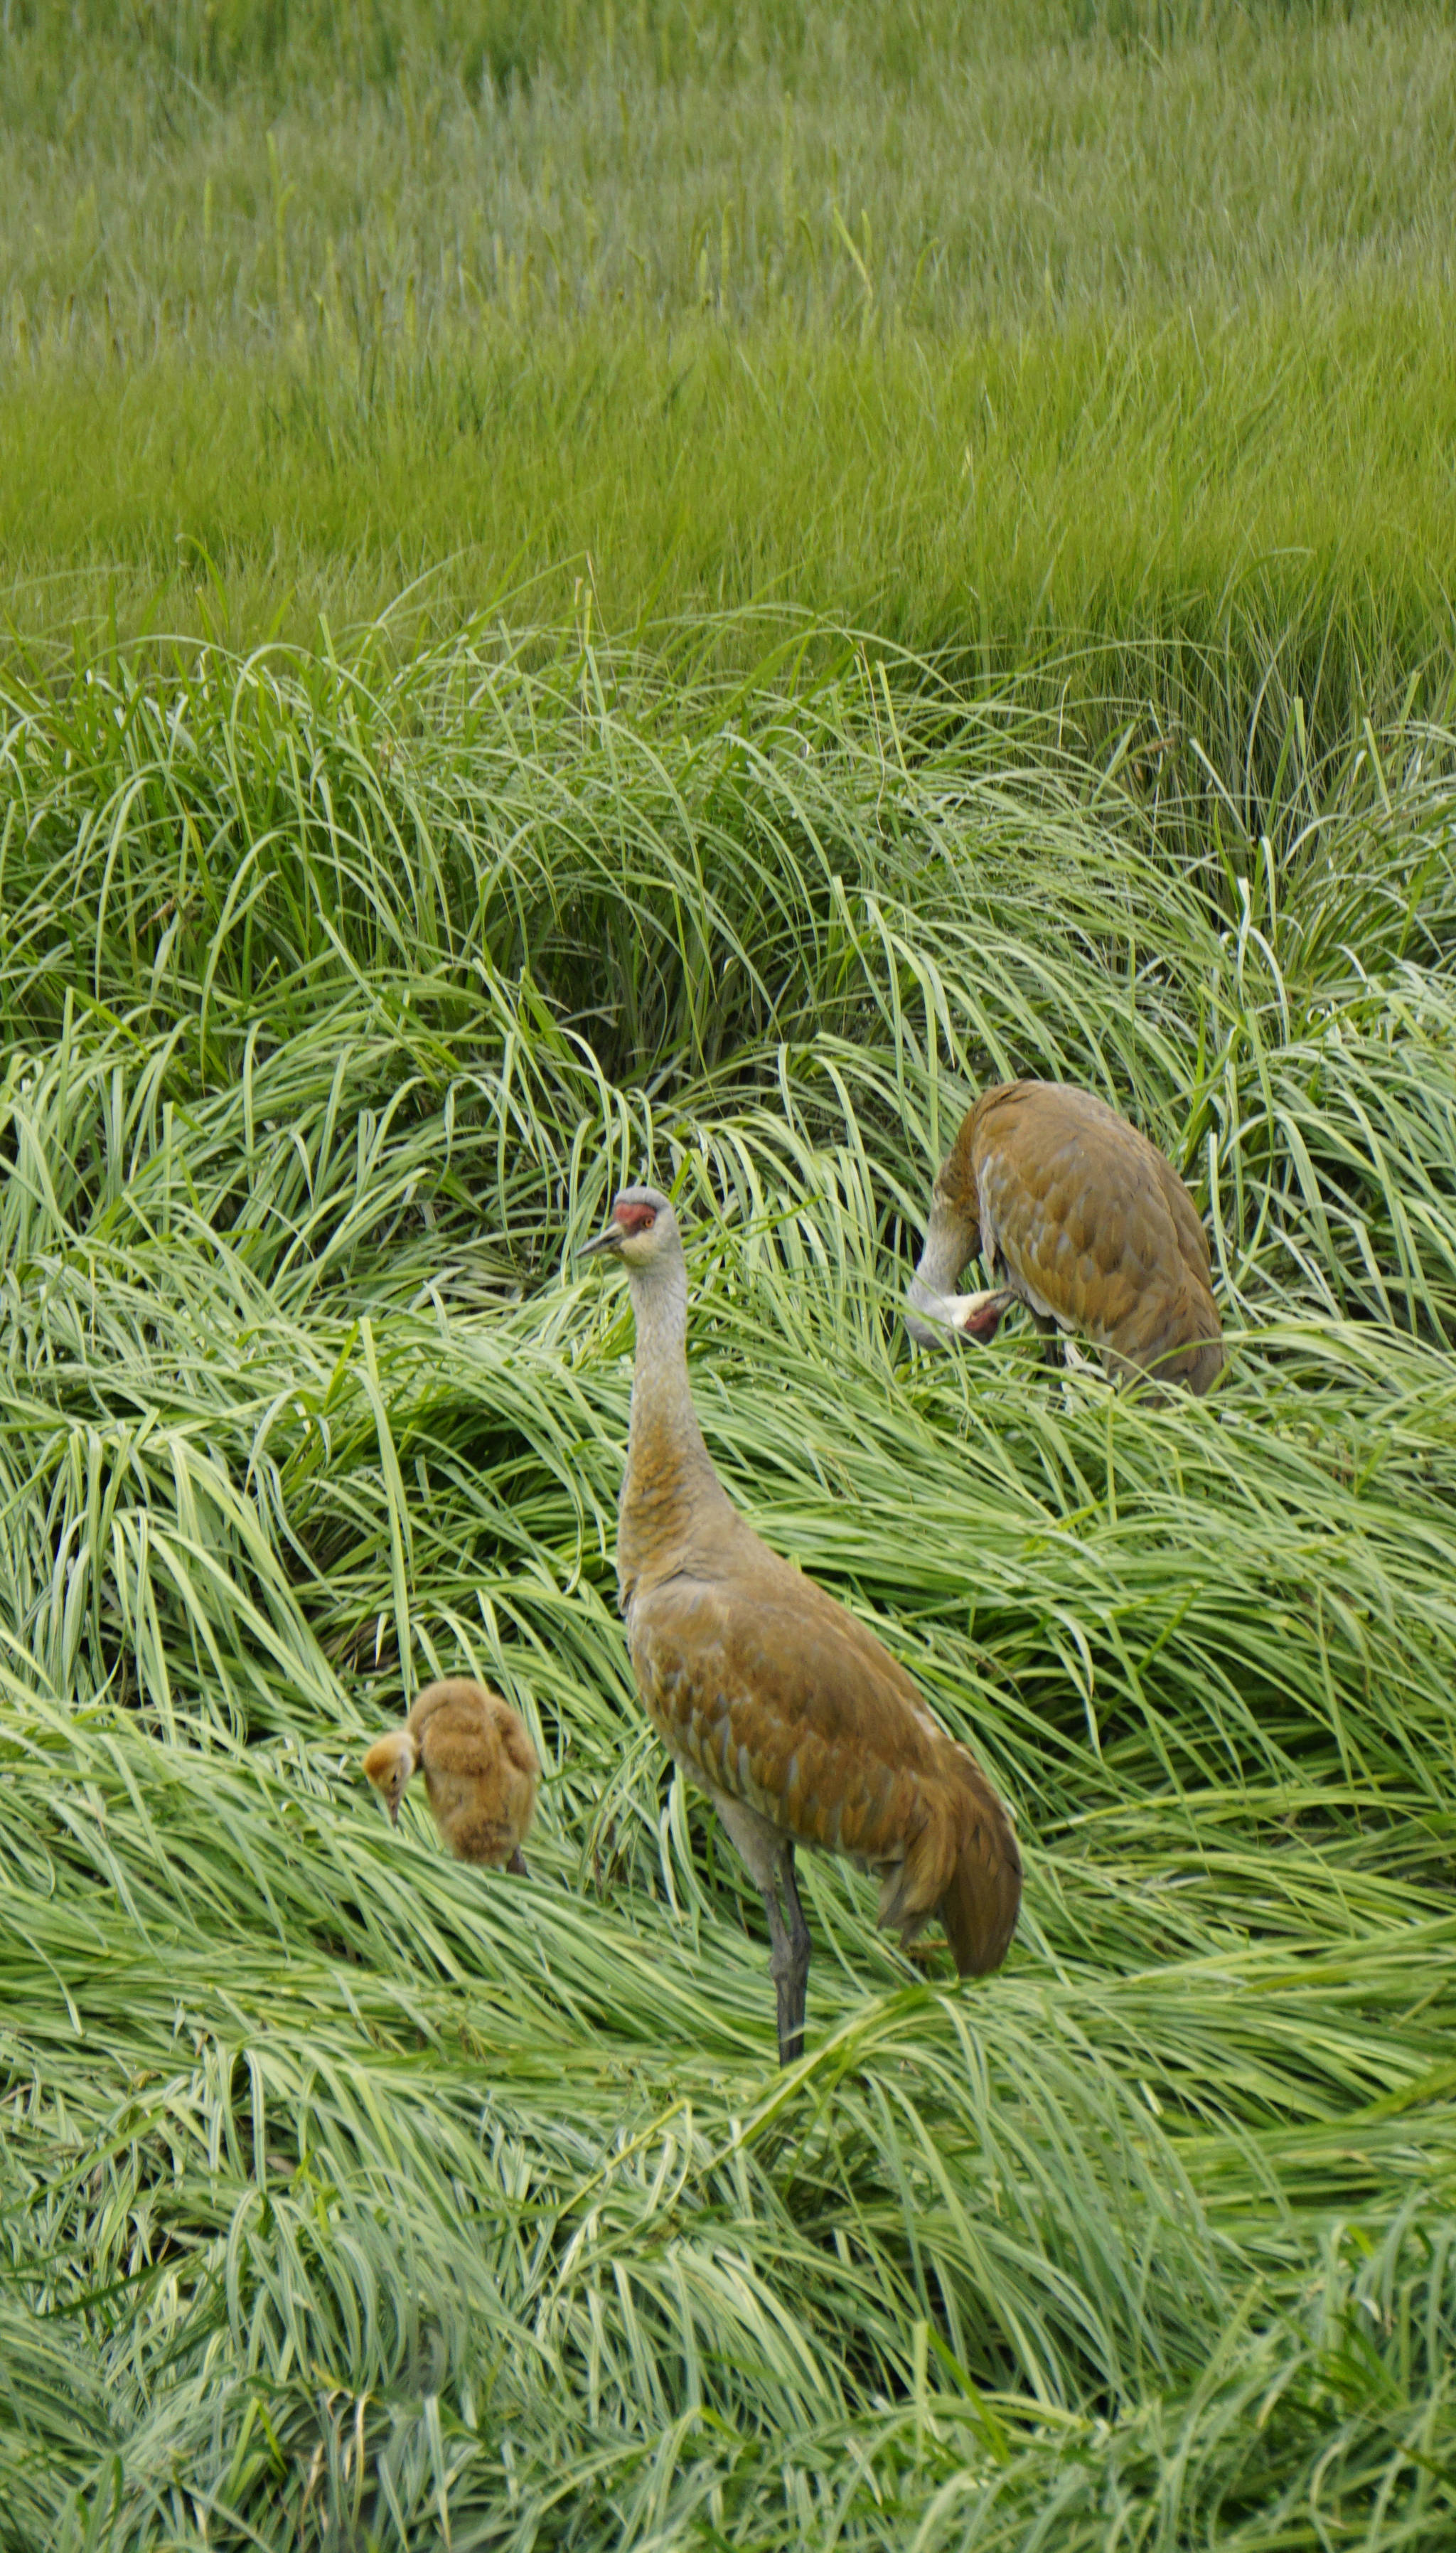 A pair of sandhill cranes and a young colt feed in Beluga Slough at the southeast corner near the pedestrian and bike path about 11:30 a.m. Saturday, June 23, 2018 in Homer, Alaska. (Photo by Michael Armstrong/Homer News)